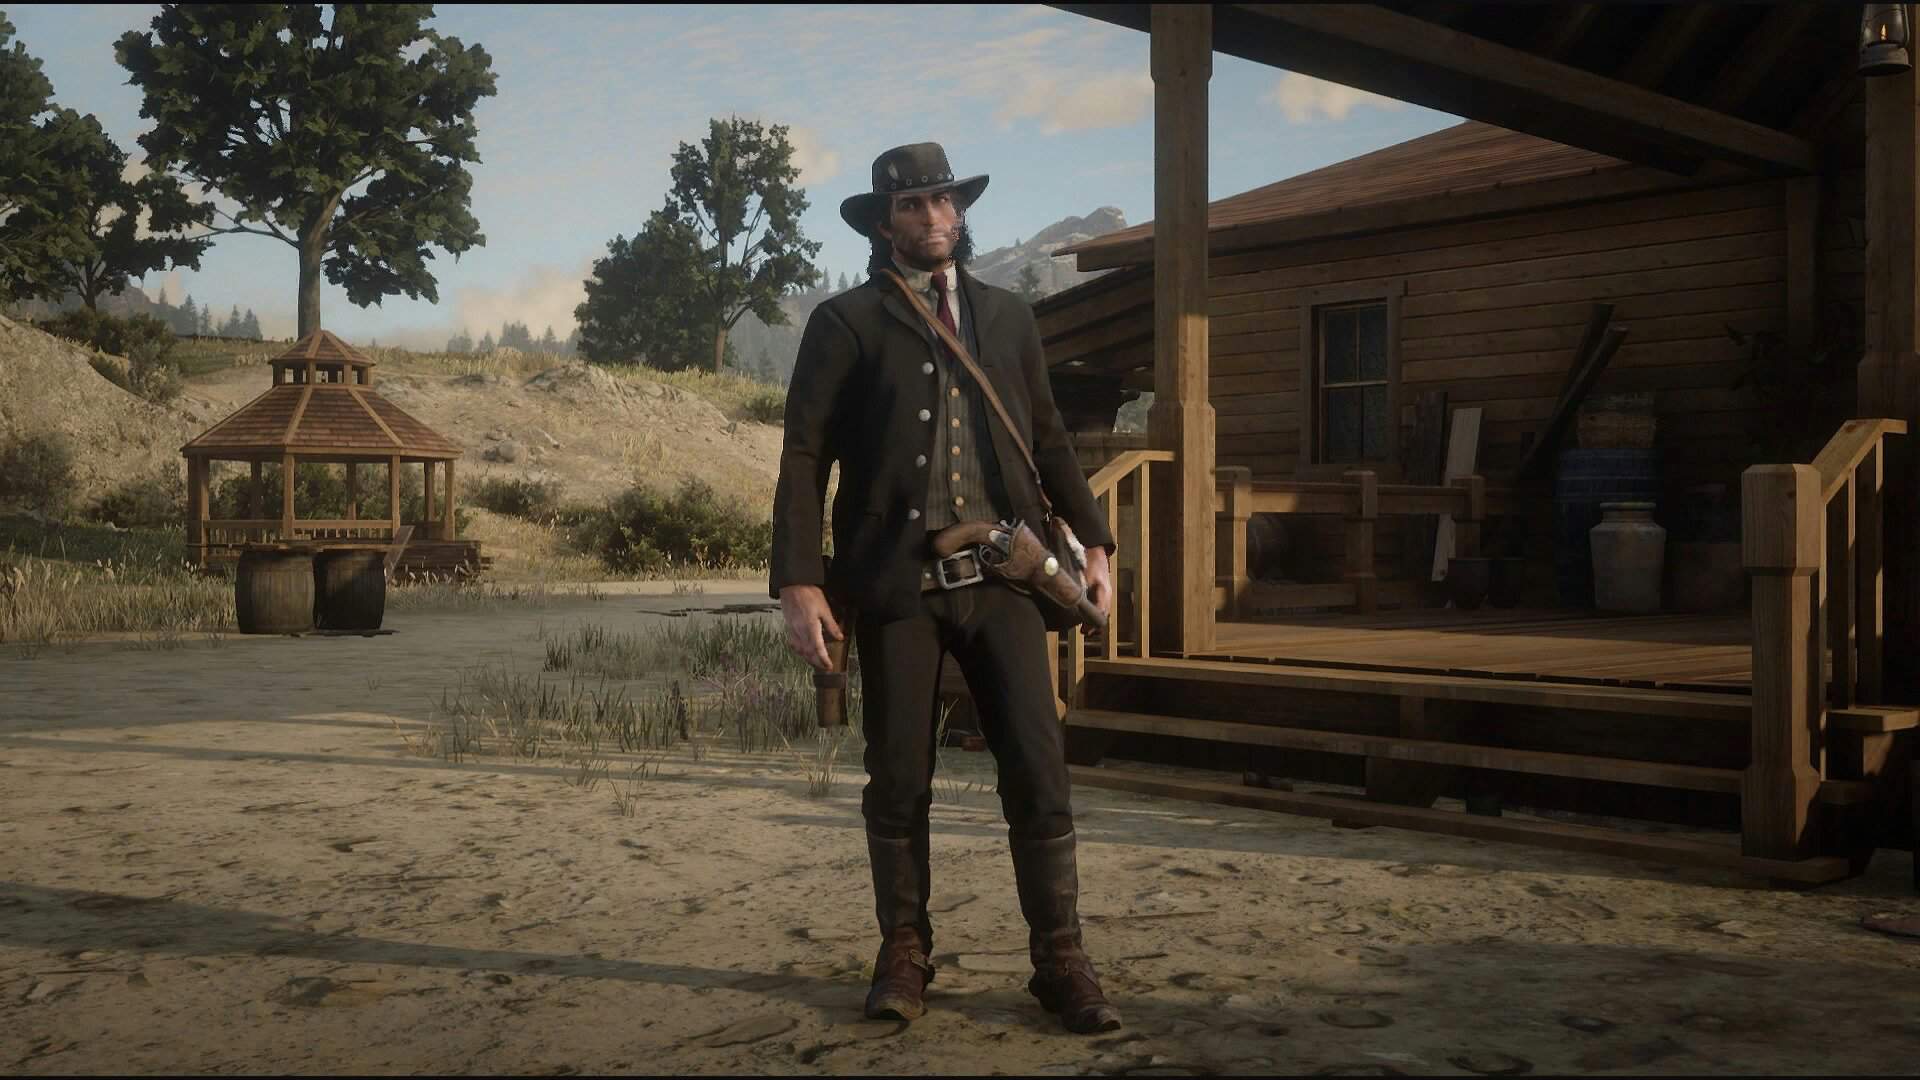 Rdr1 outfits in rdr2 #1 The Red Dead Redemption Amino.